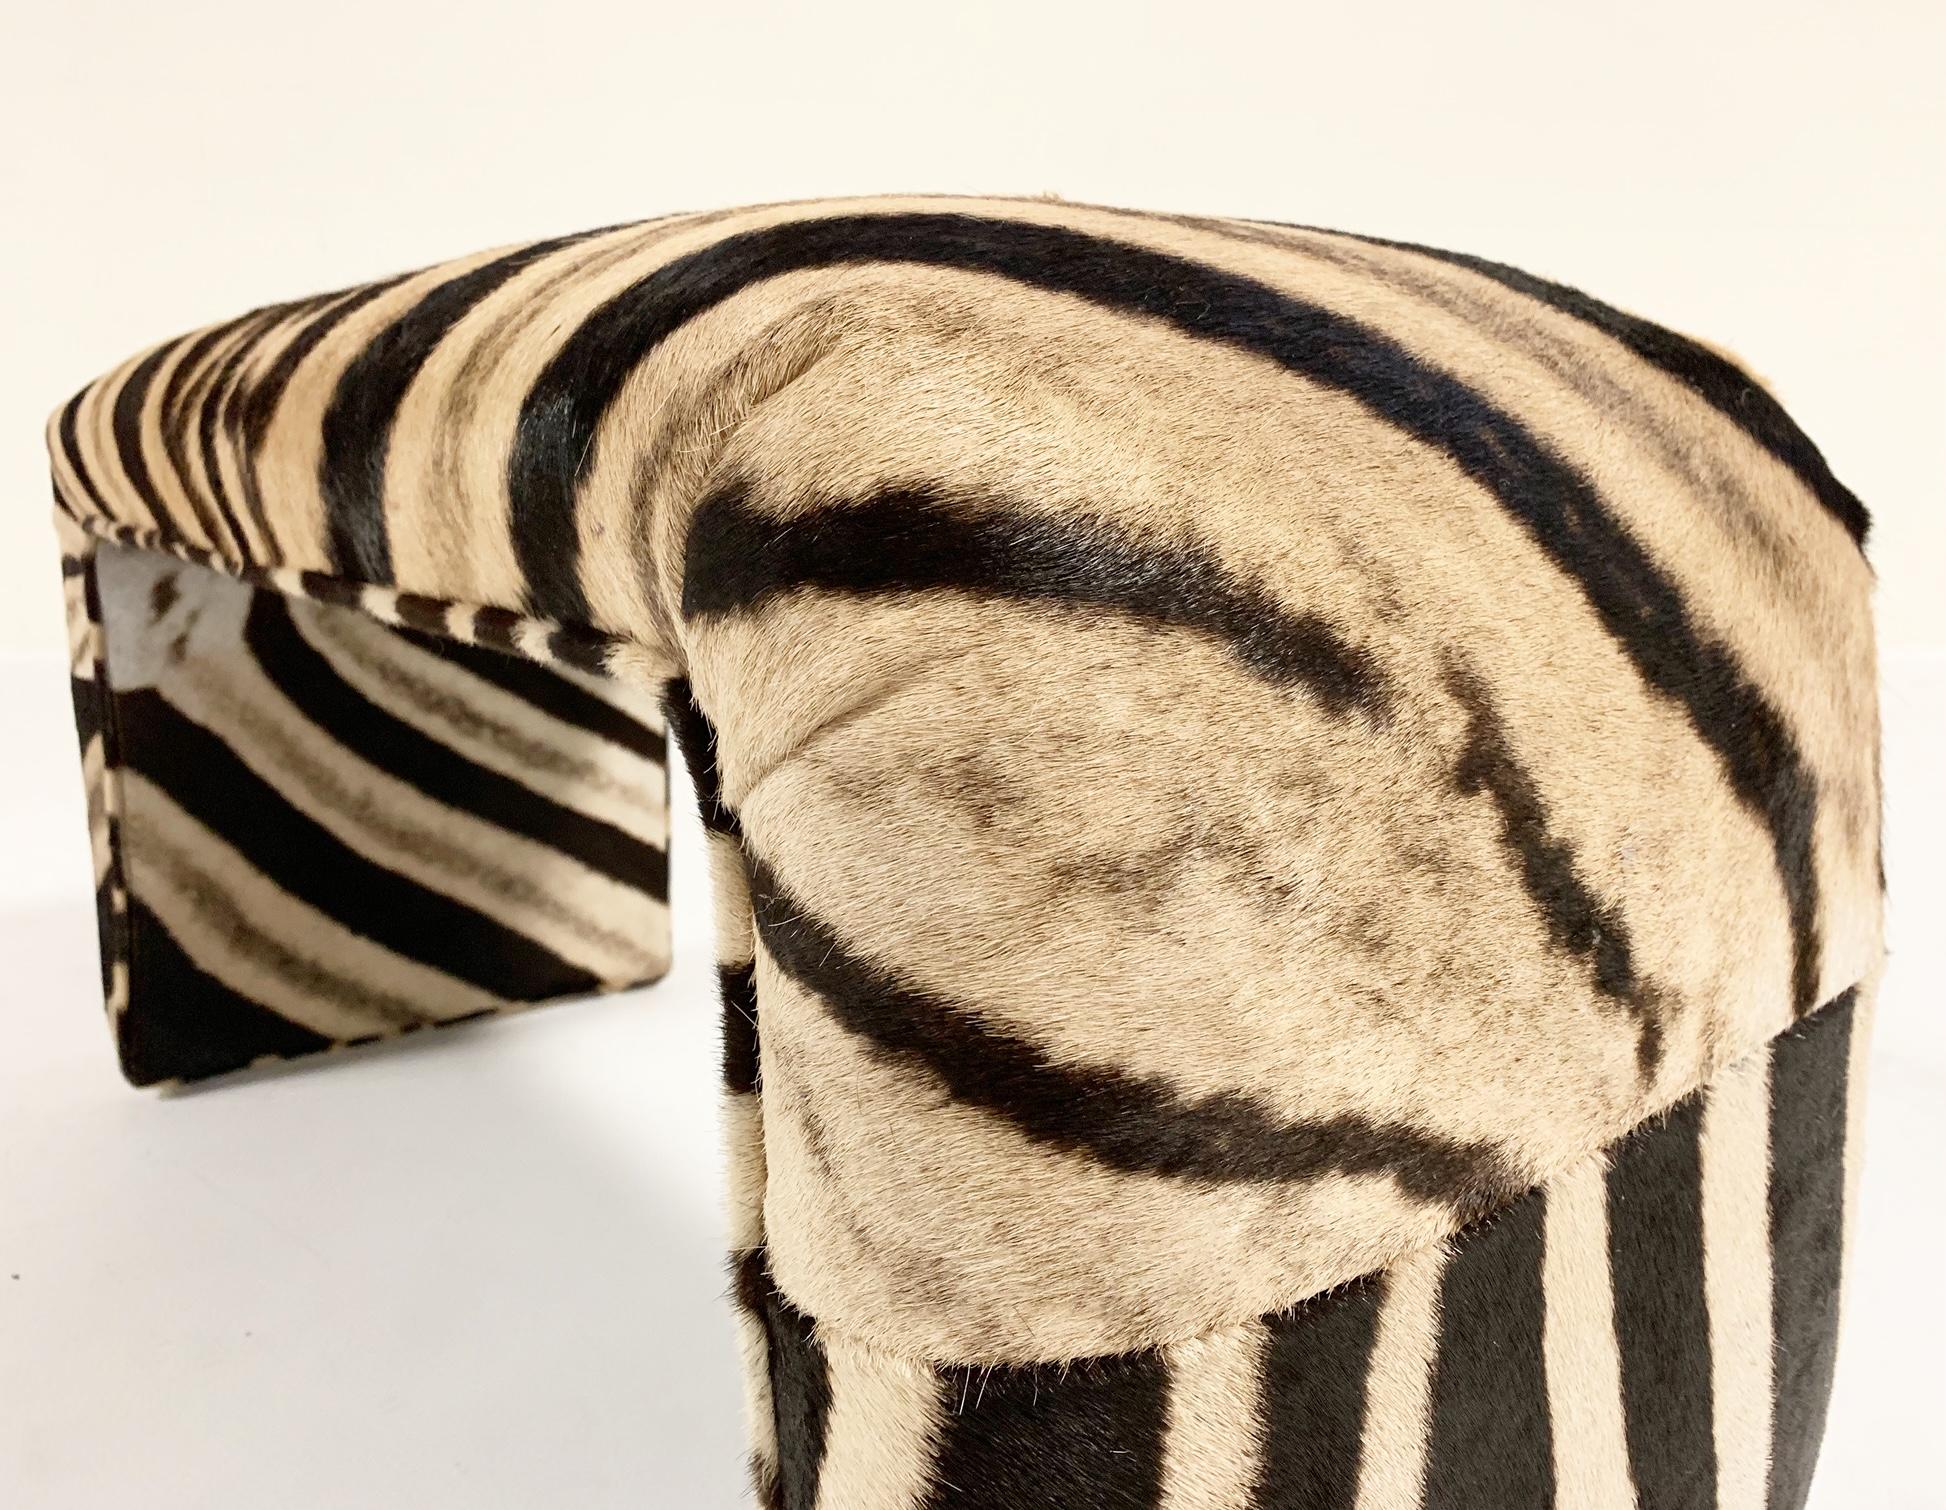 We collected this bench for its unique shape, the Classic waterfall. The entire piece has been meticulously reupholstered in zebra hide. It's a beautiful piece and the perfect accent in any room.

Measures: 37.5